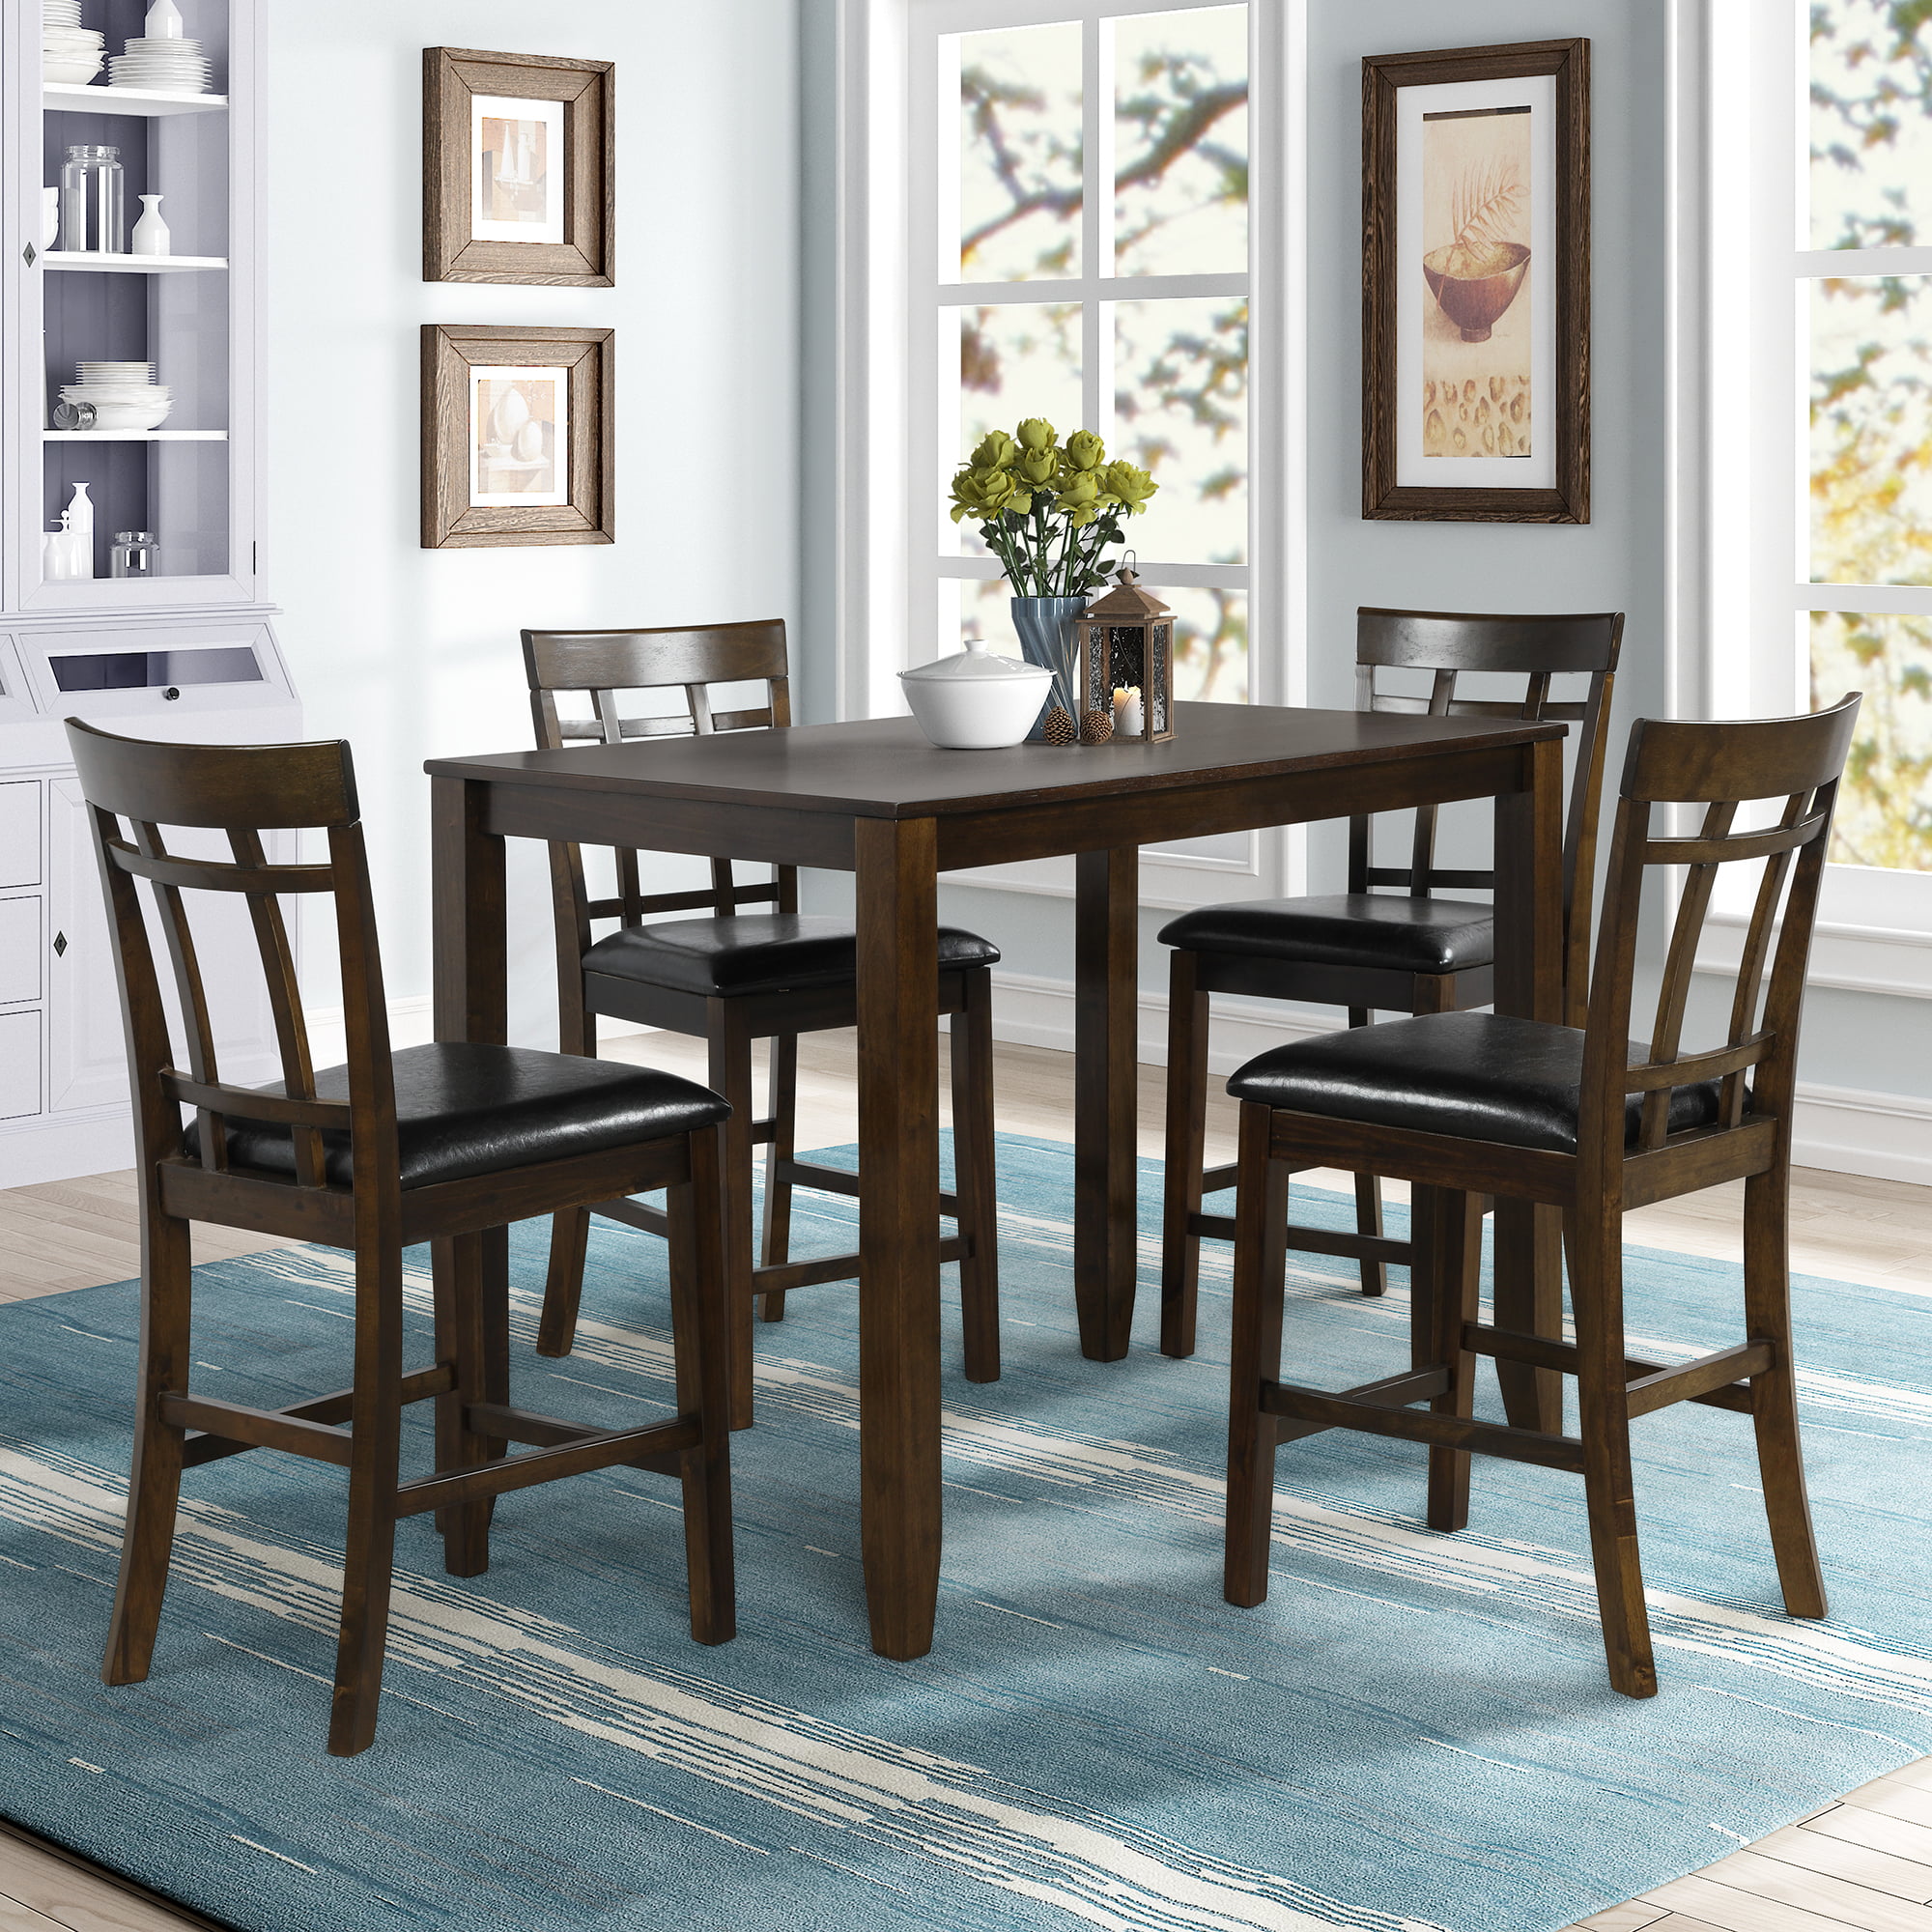 Modern 5 Pieces Breakfast Dining Table Set